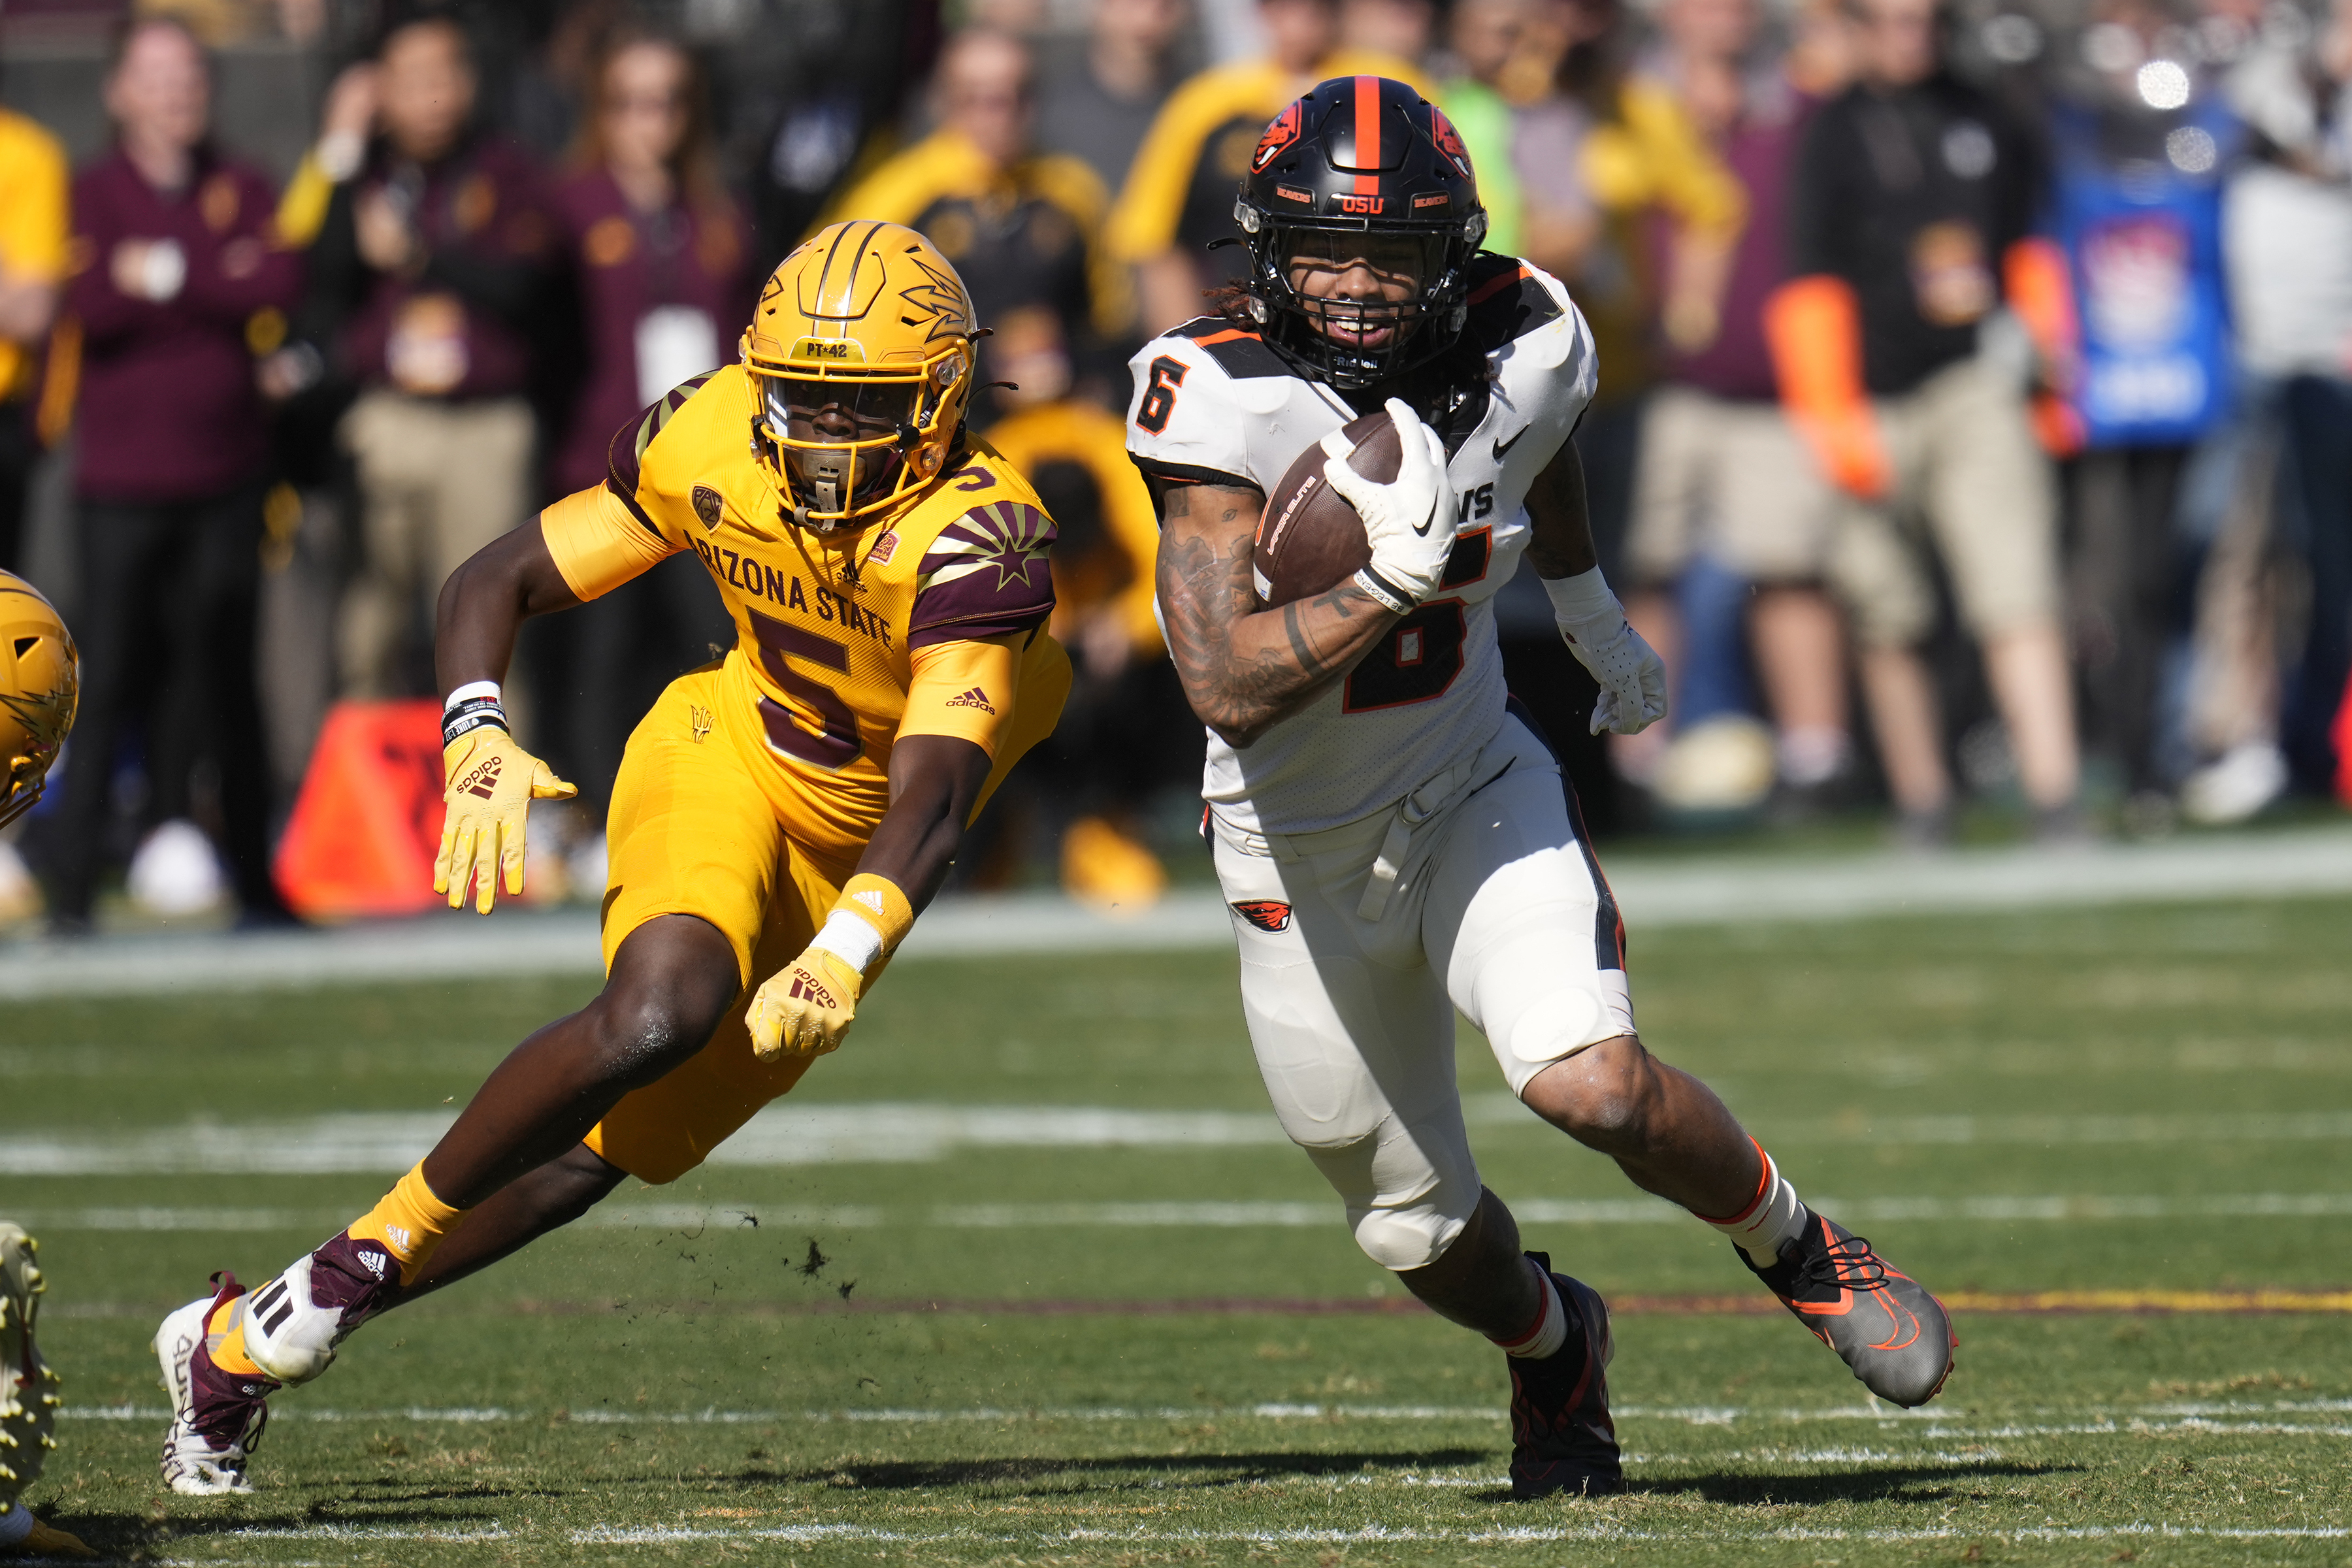 No. 18 Oregon State opens a season of high expectations at San